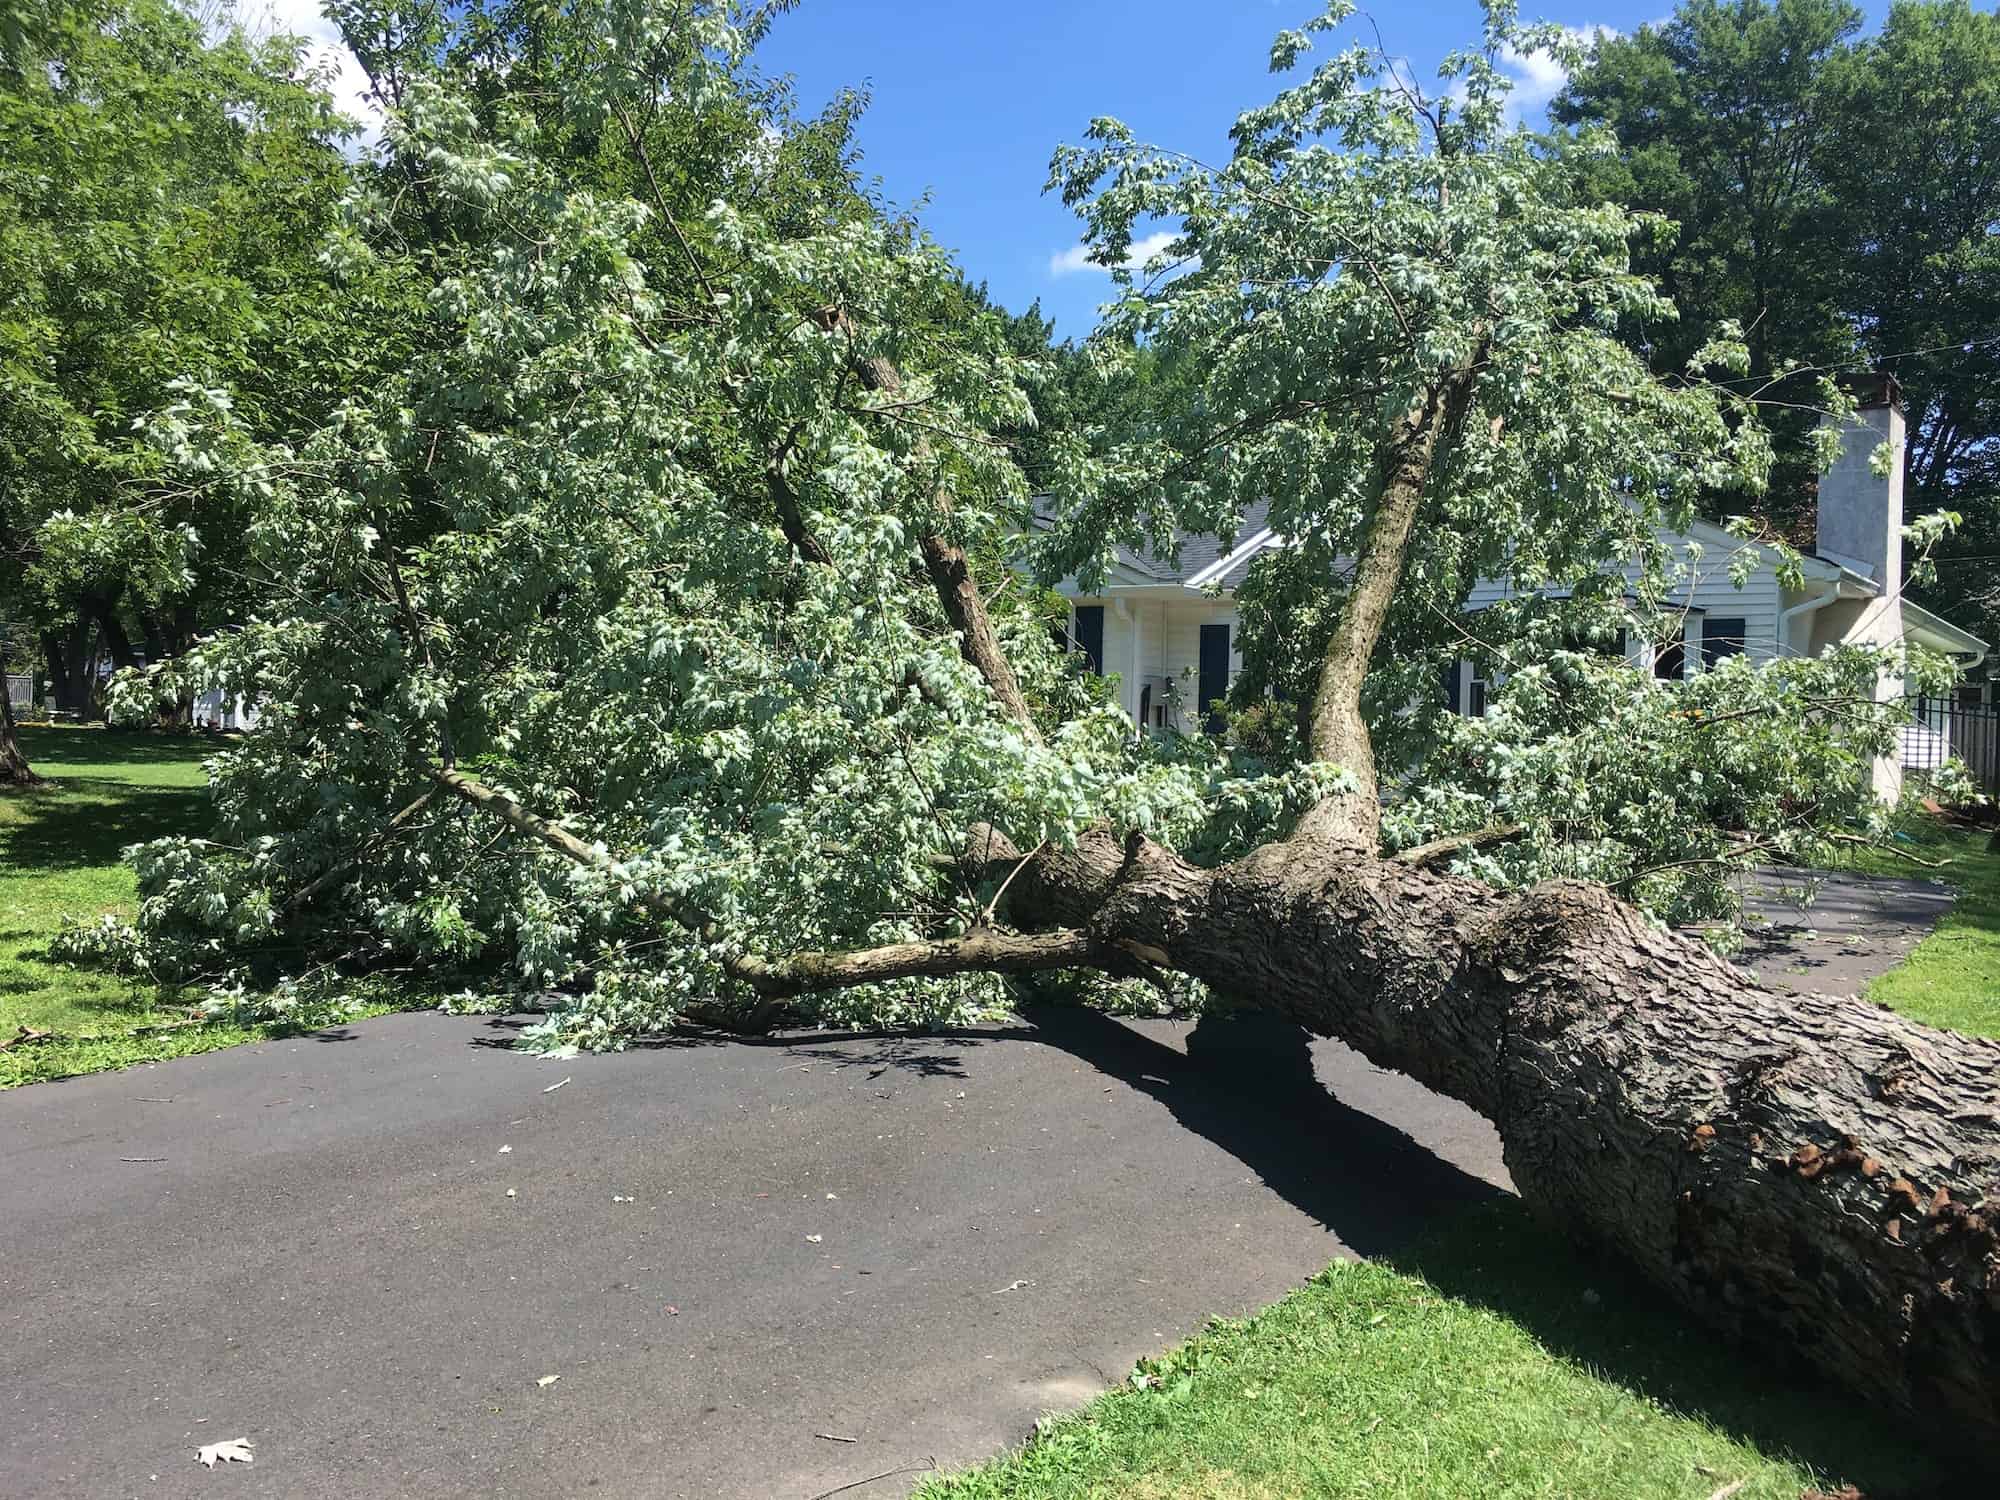 Tree that had fallen in driveway of home